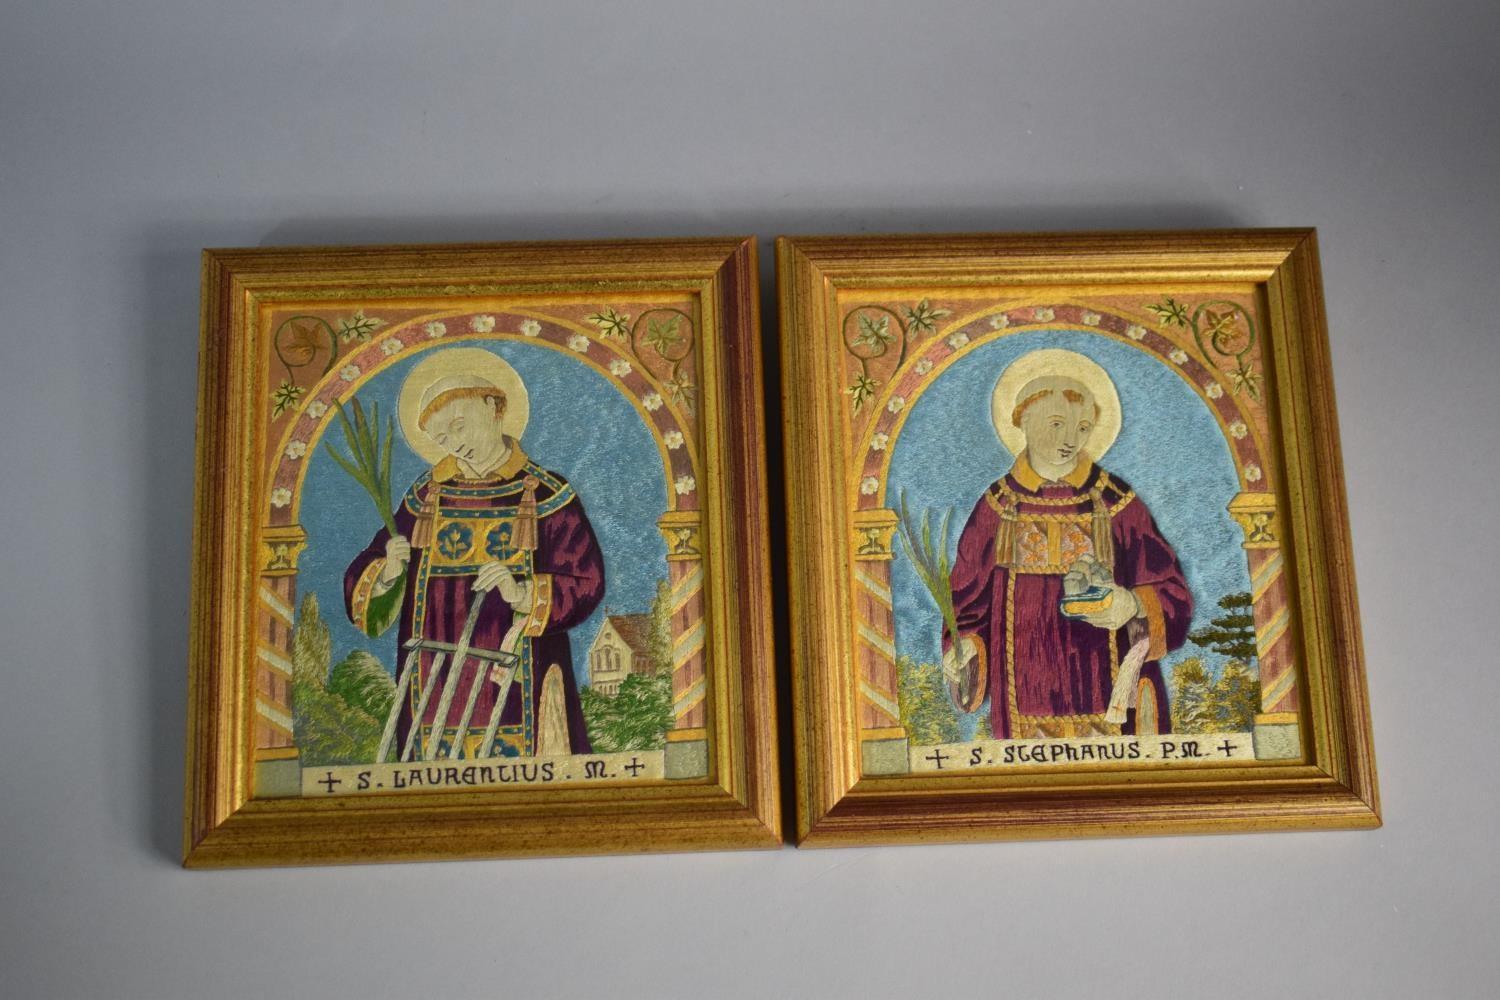 A Pair of Framed Silk Embroideries of St Stephanus and St Laurentius. Each 20x17.5cms High - Image 2 of 2